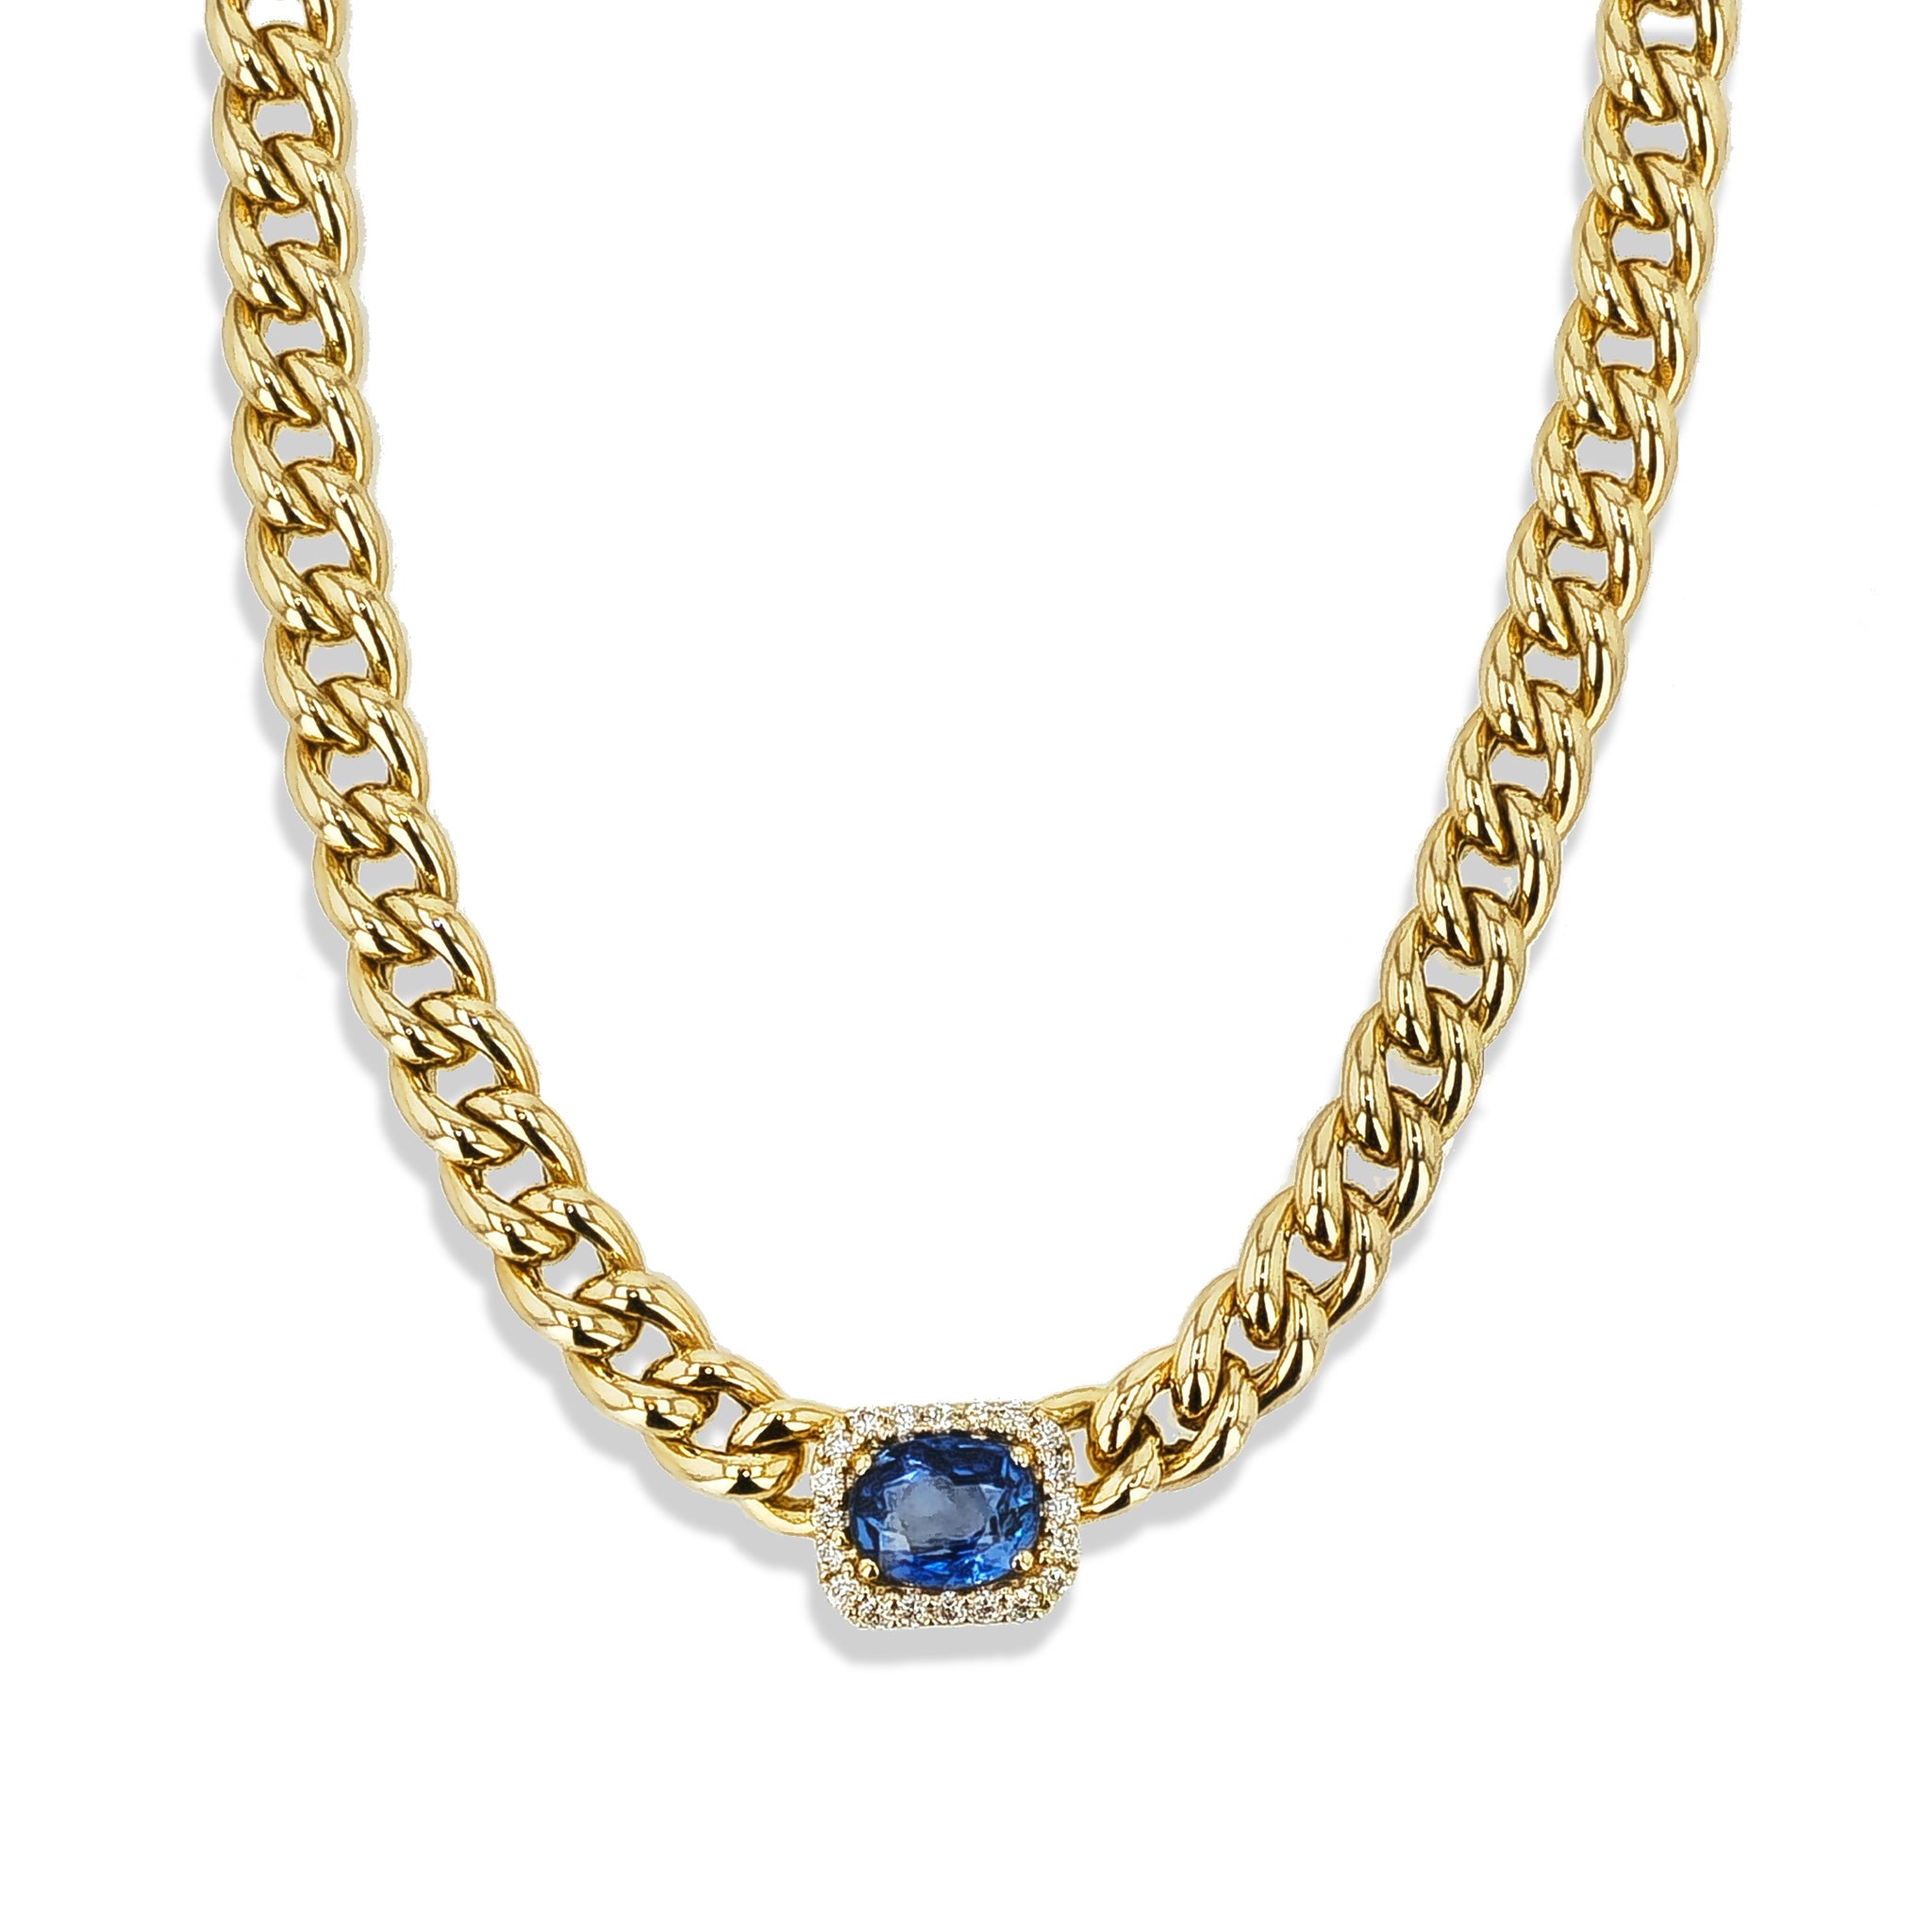 Oval Sapphire Diamond Pave 18k Yellow Gold Necklace Necklaces Curated by H